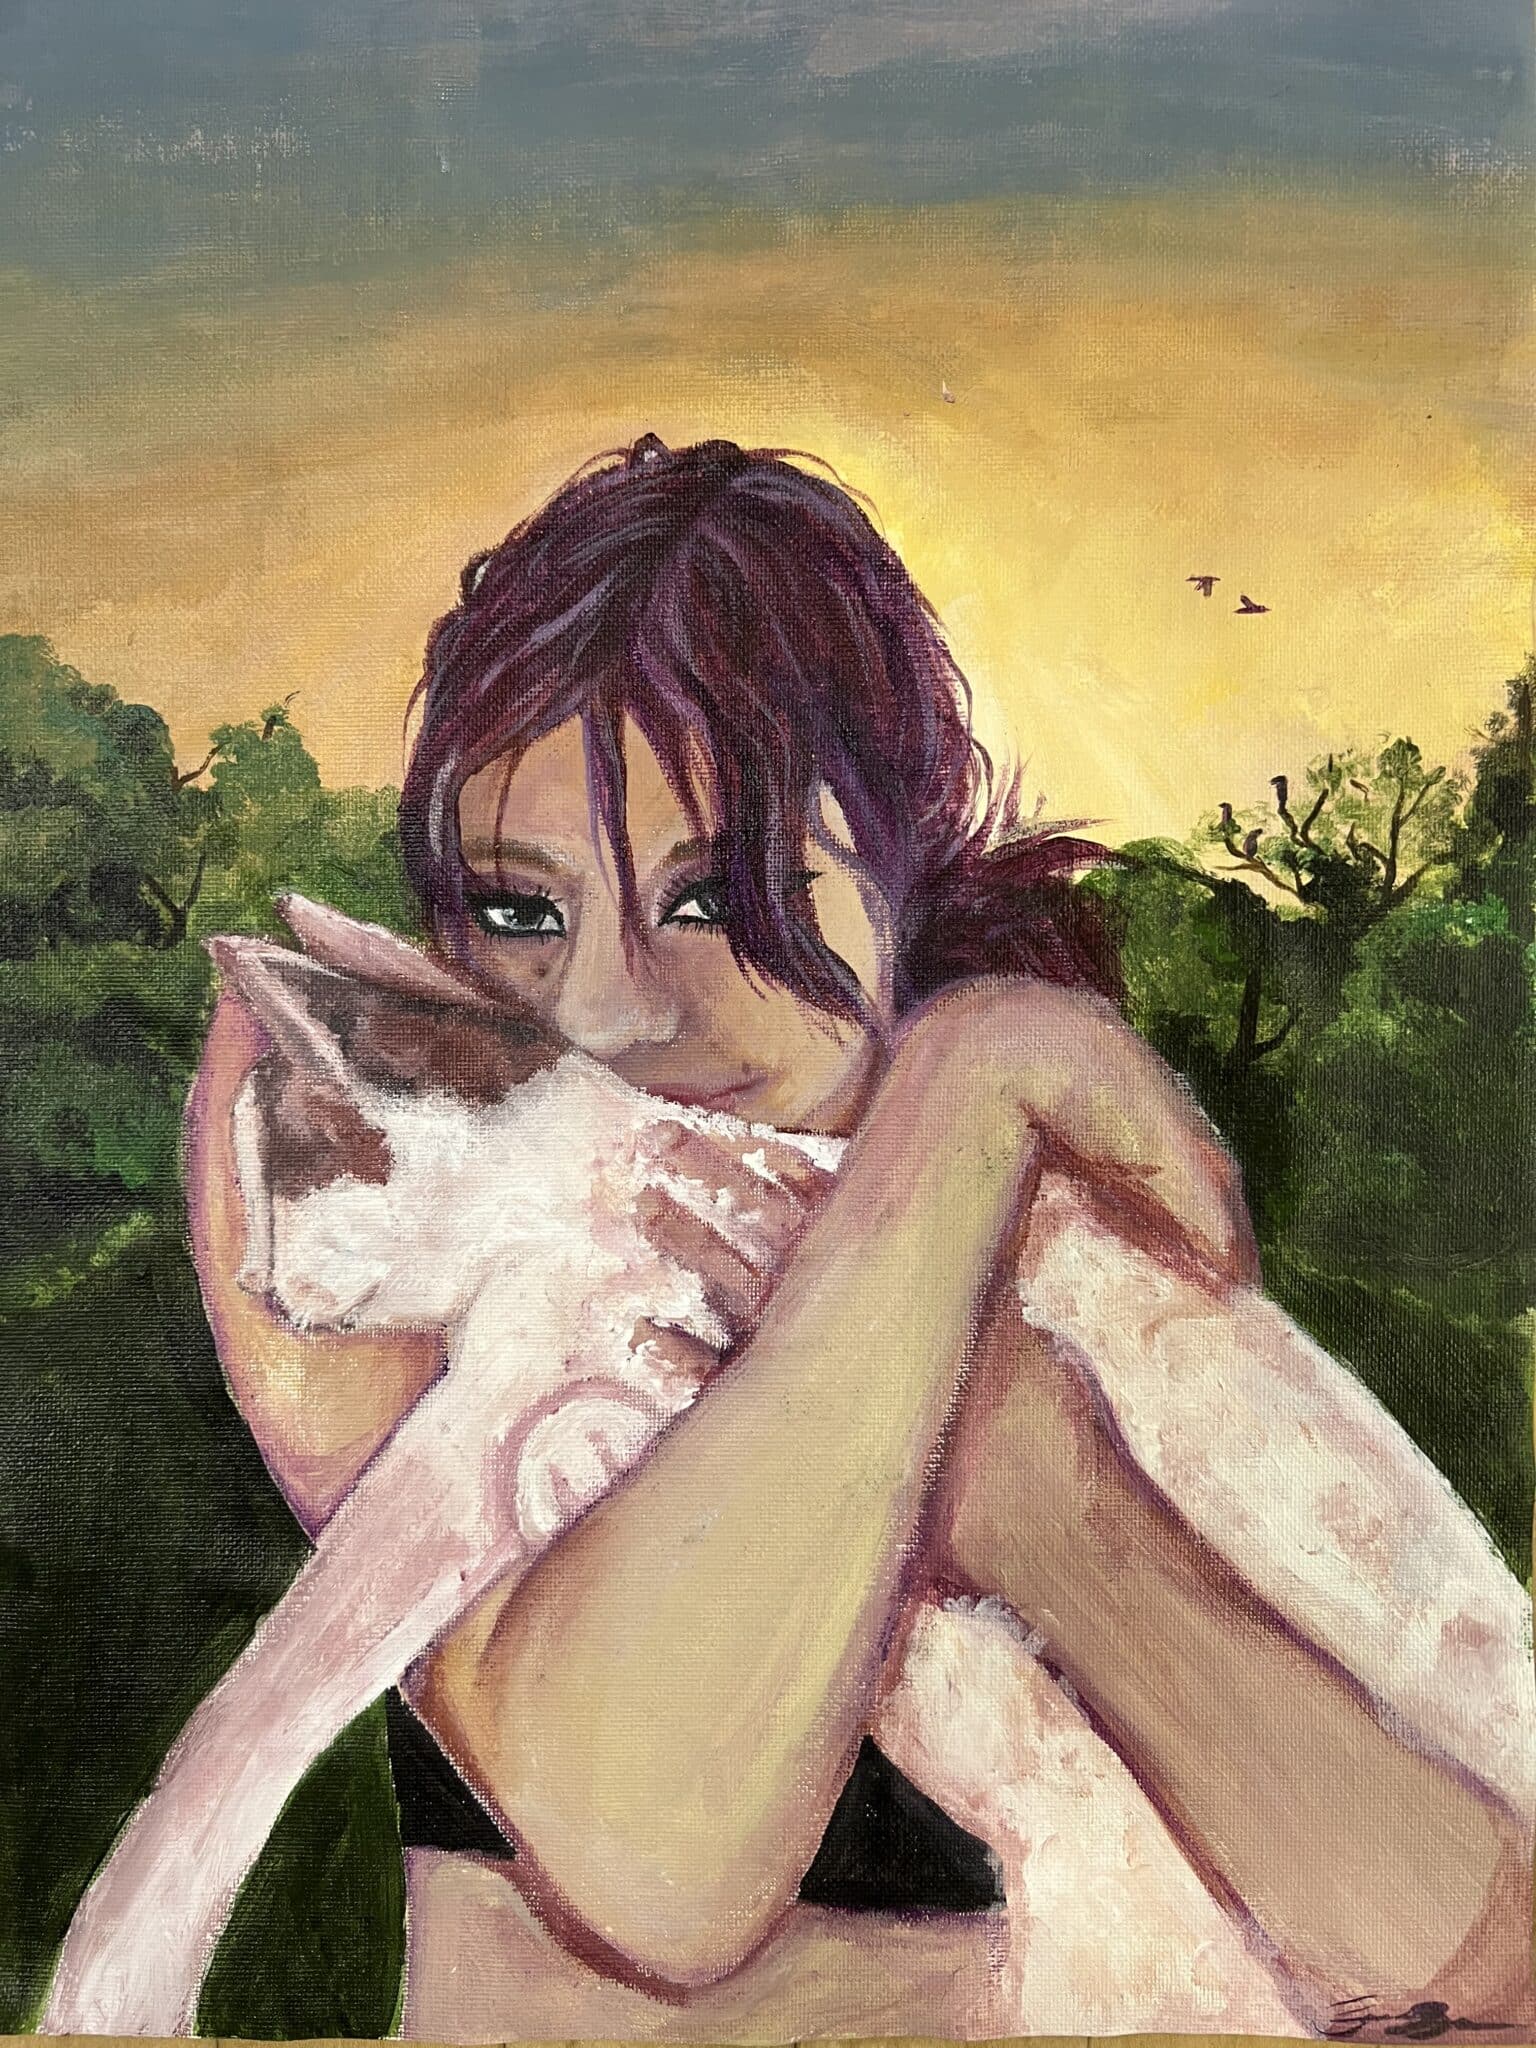 A copy of SCA Junior Charlotte Brownlee’s Missouri Senate District 8 Art Contest winning acrylic painting “A Warm Embrace” will hang in the Senate hallway gallery from March 2023 through February 2024.